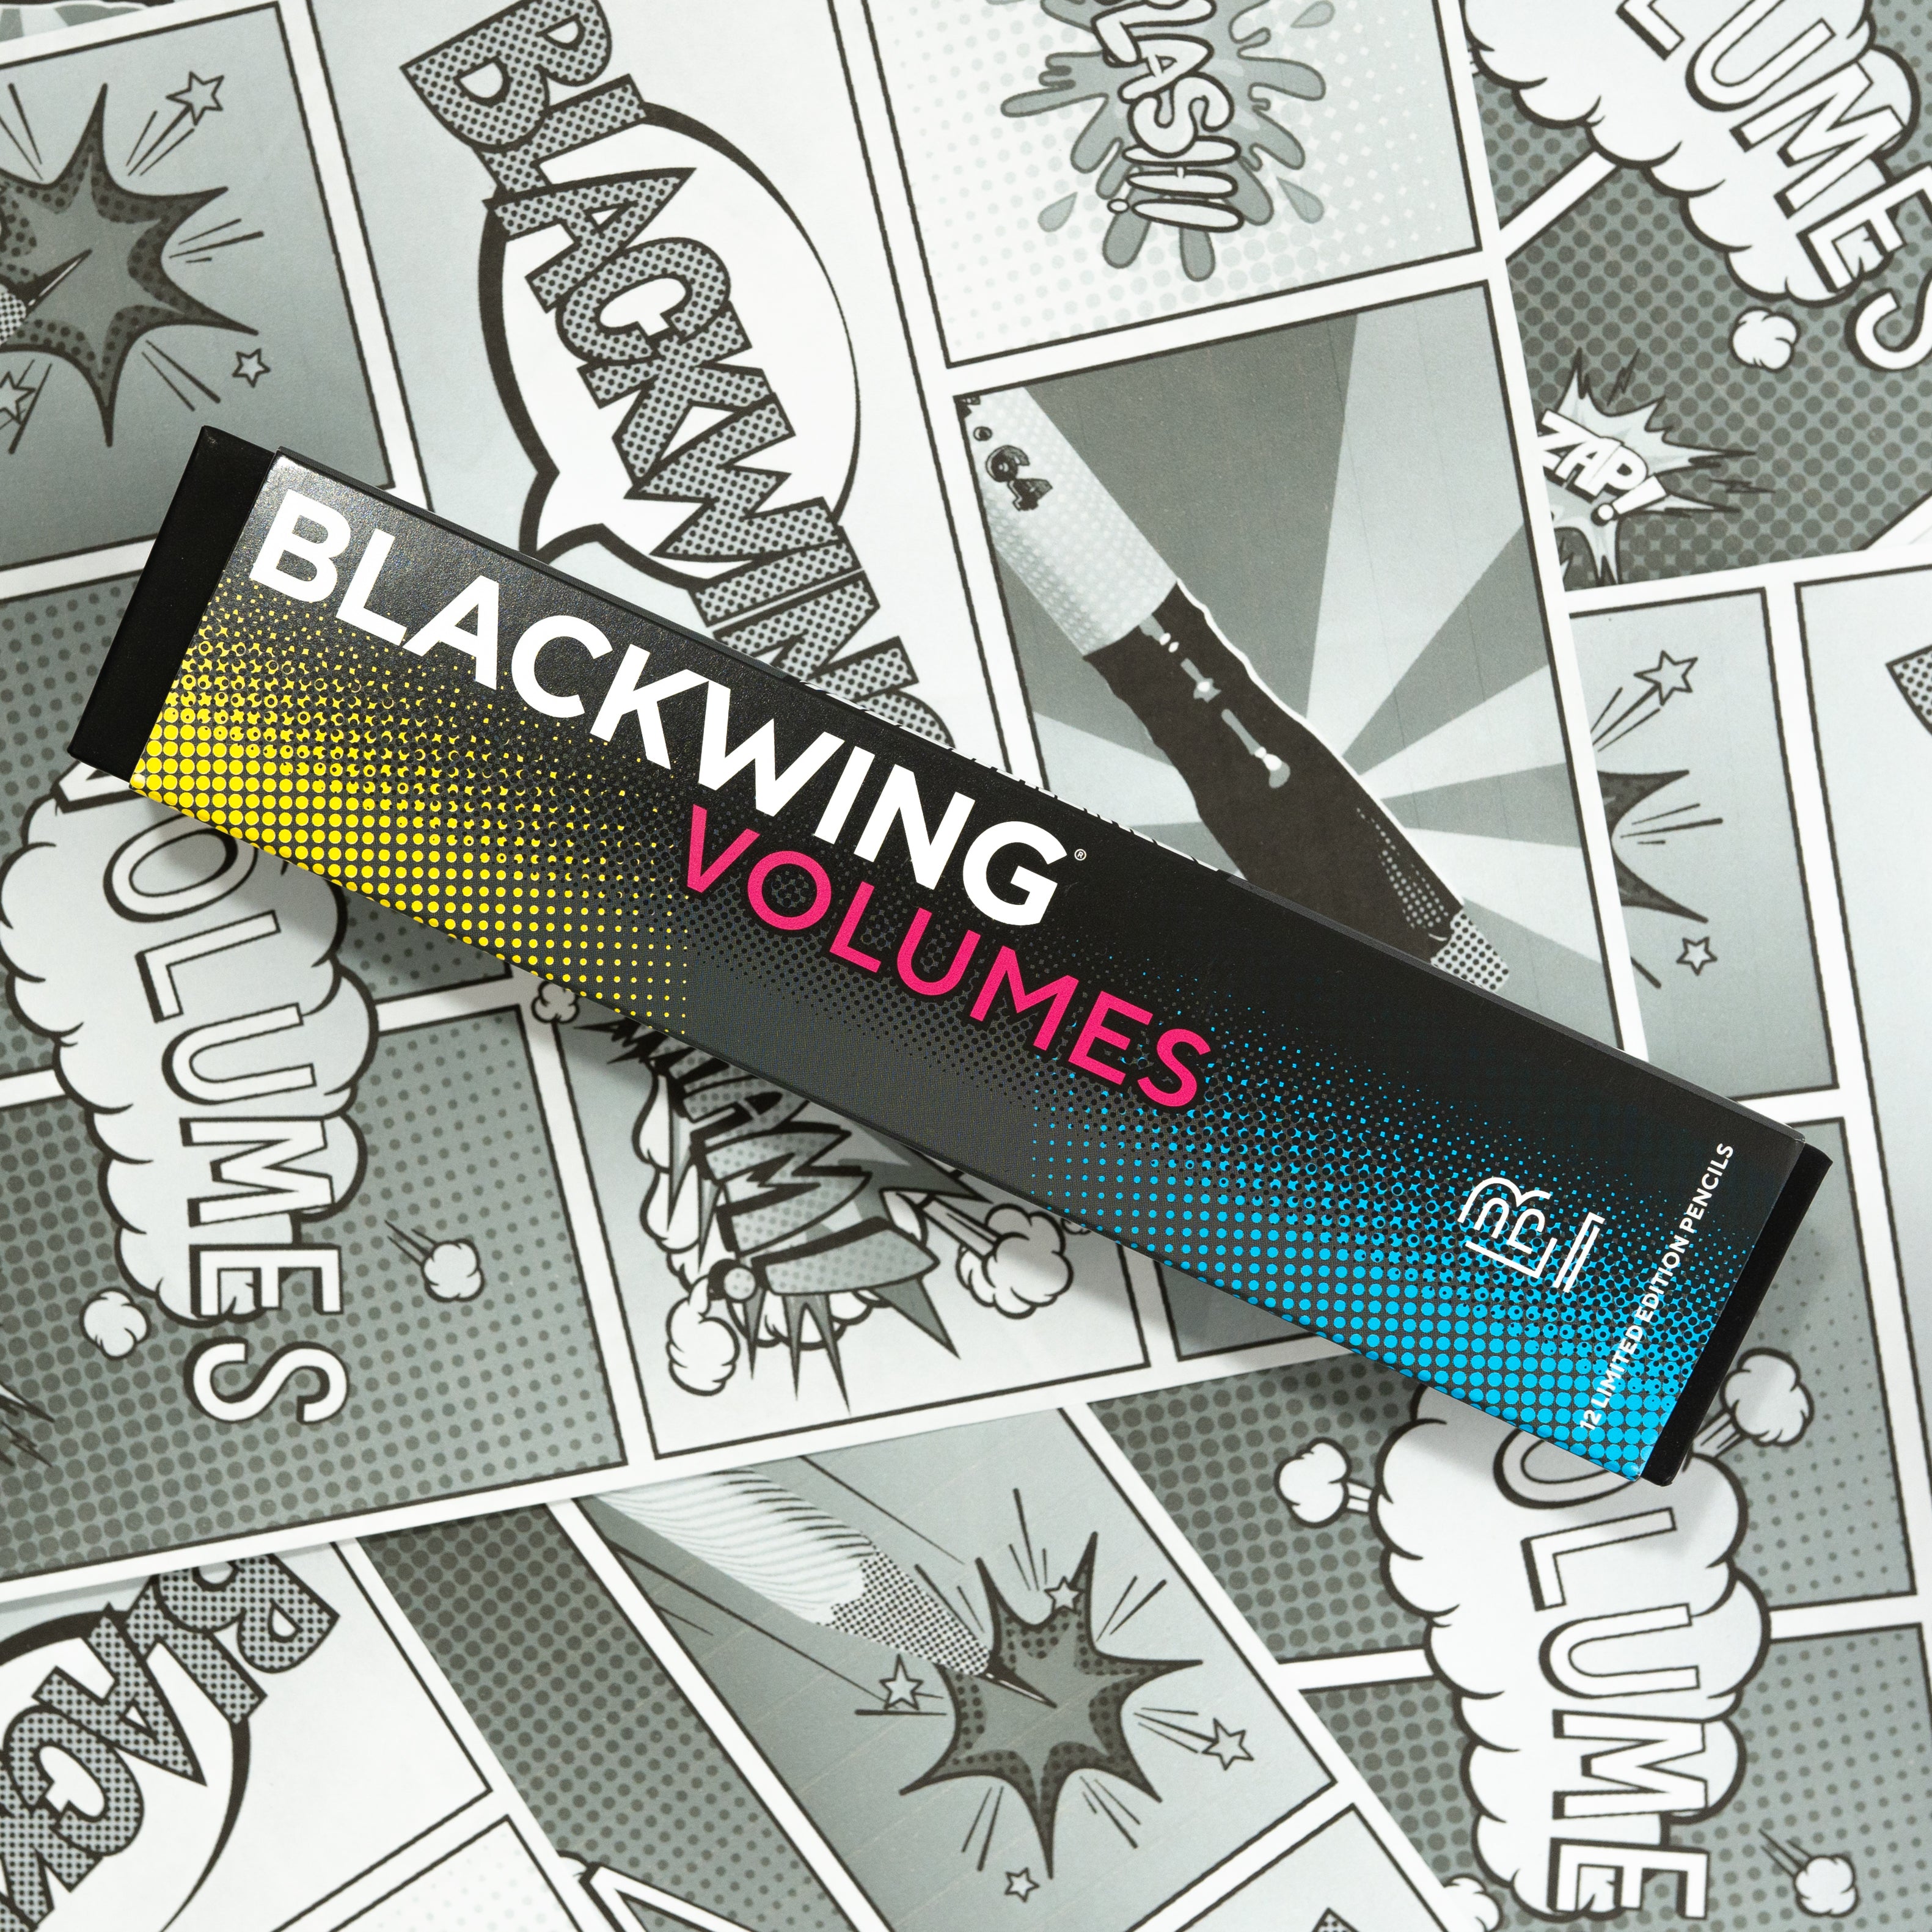 Blackwing Volume 64 (Set of 12) are comic books filled with thrilling adventures and captivating illustrations. Whether you're a pencil enthusiast or a comic book lover, these volumes are sure to keep you entertained for hours on end.